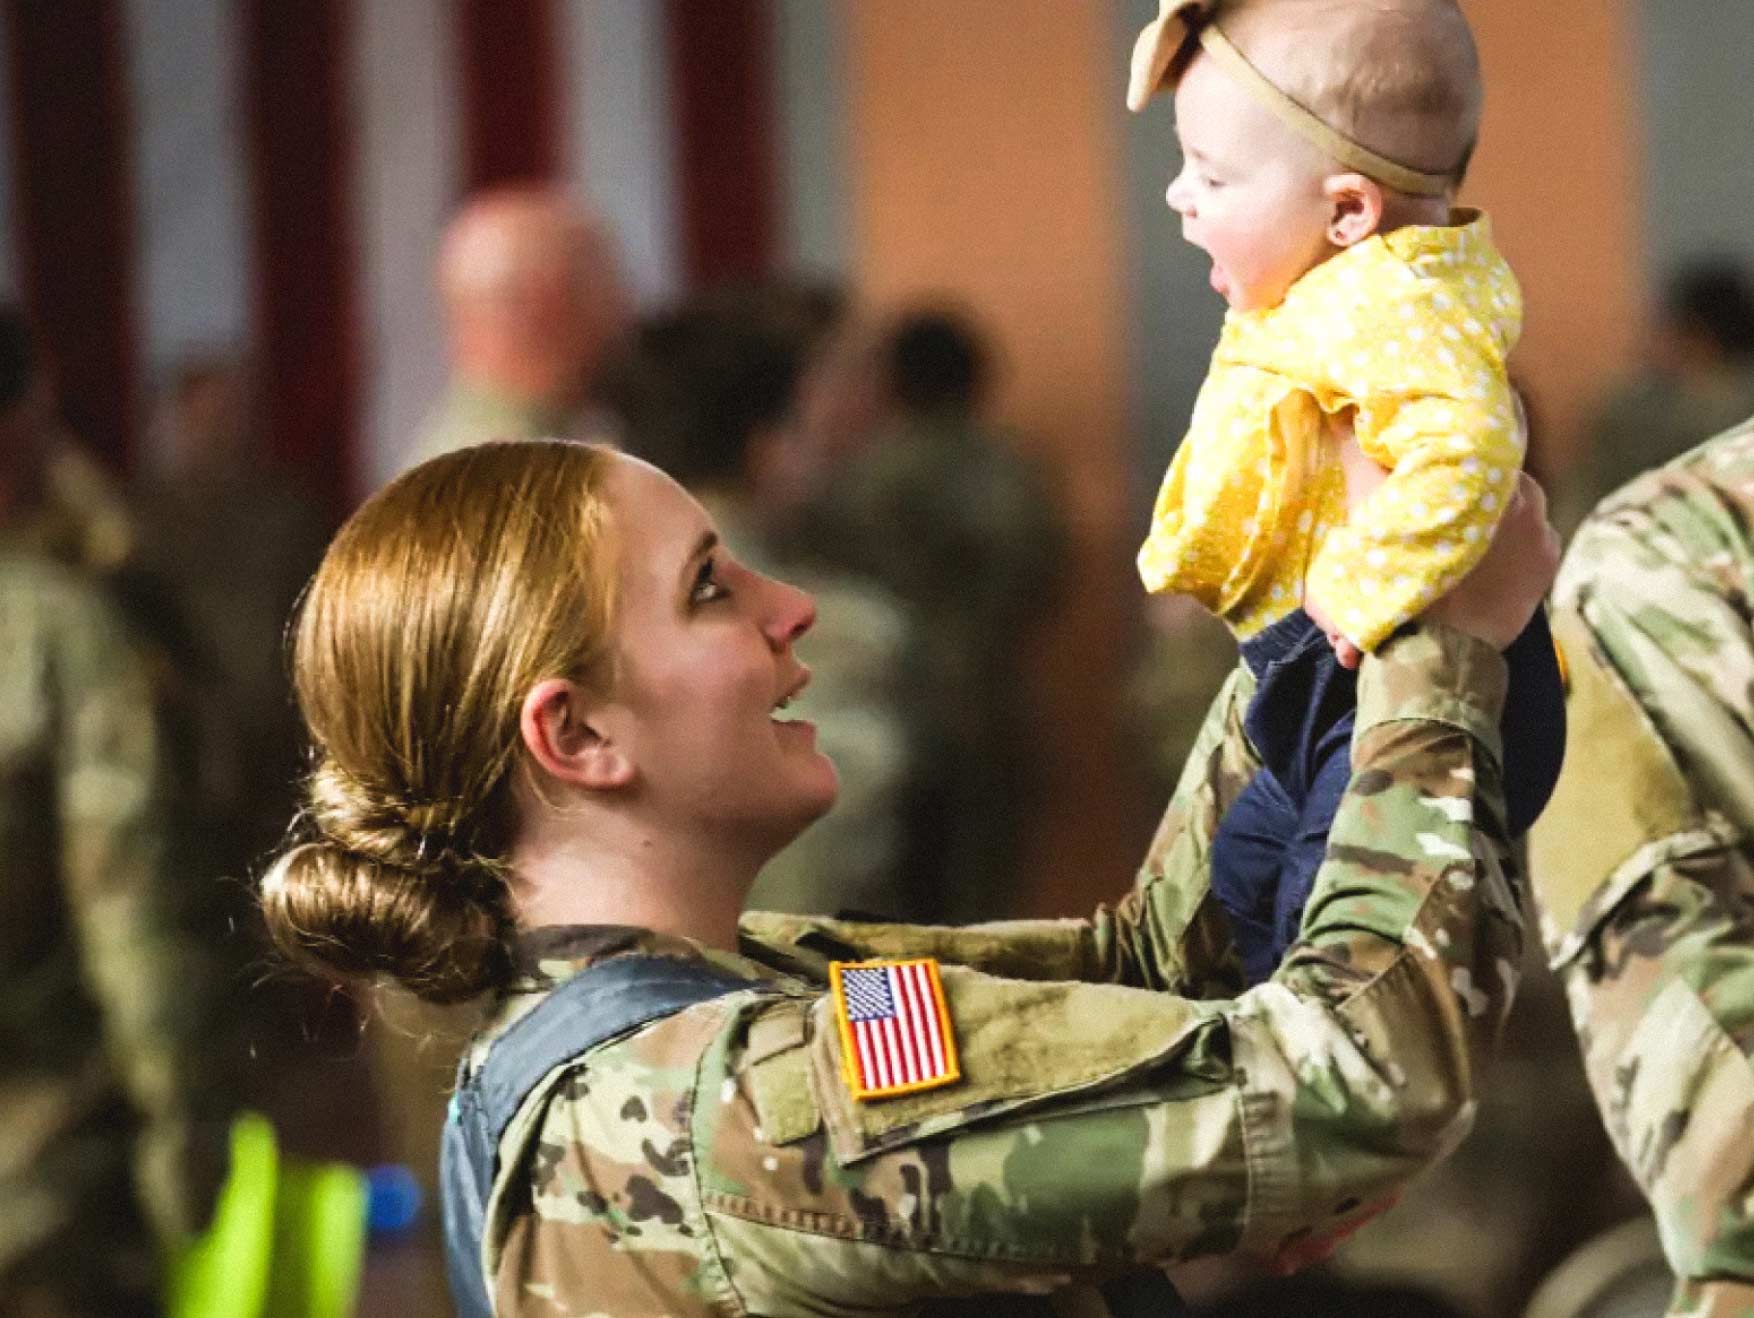 Female Soldier in combat uniform smiling and holding her baby in the air